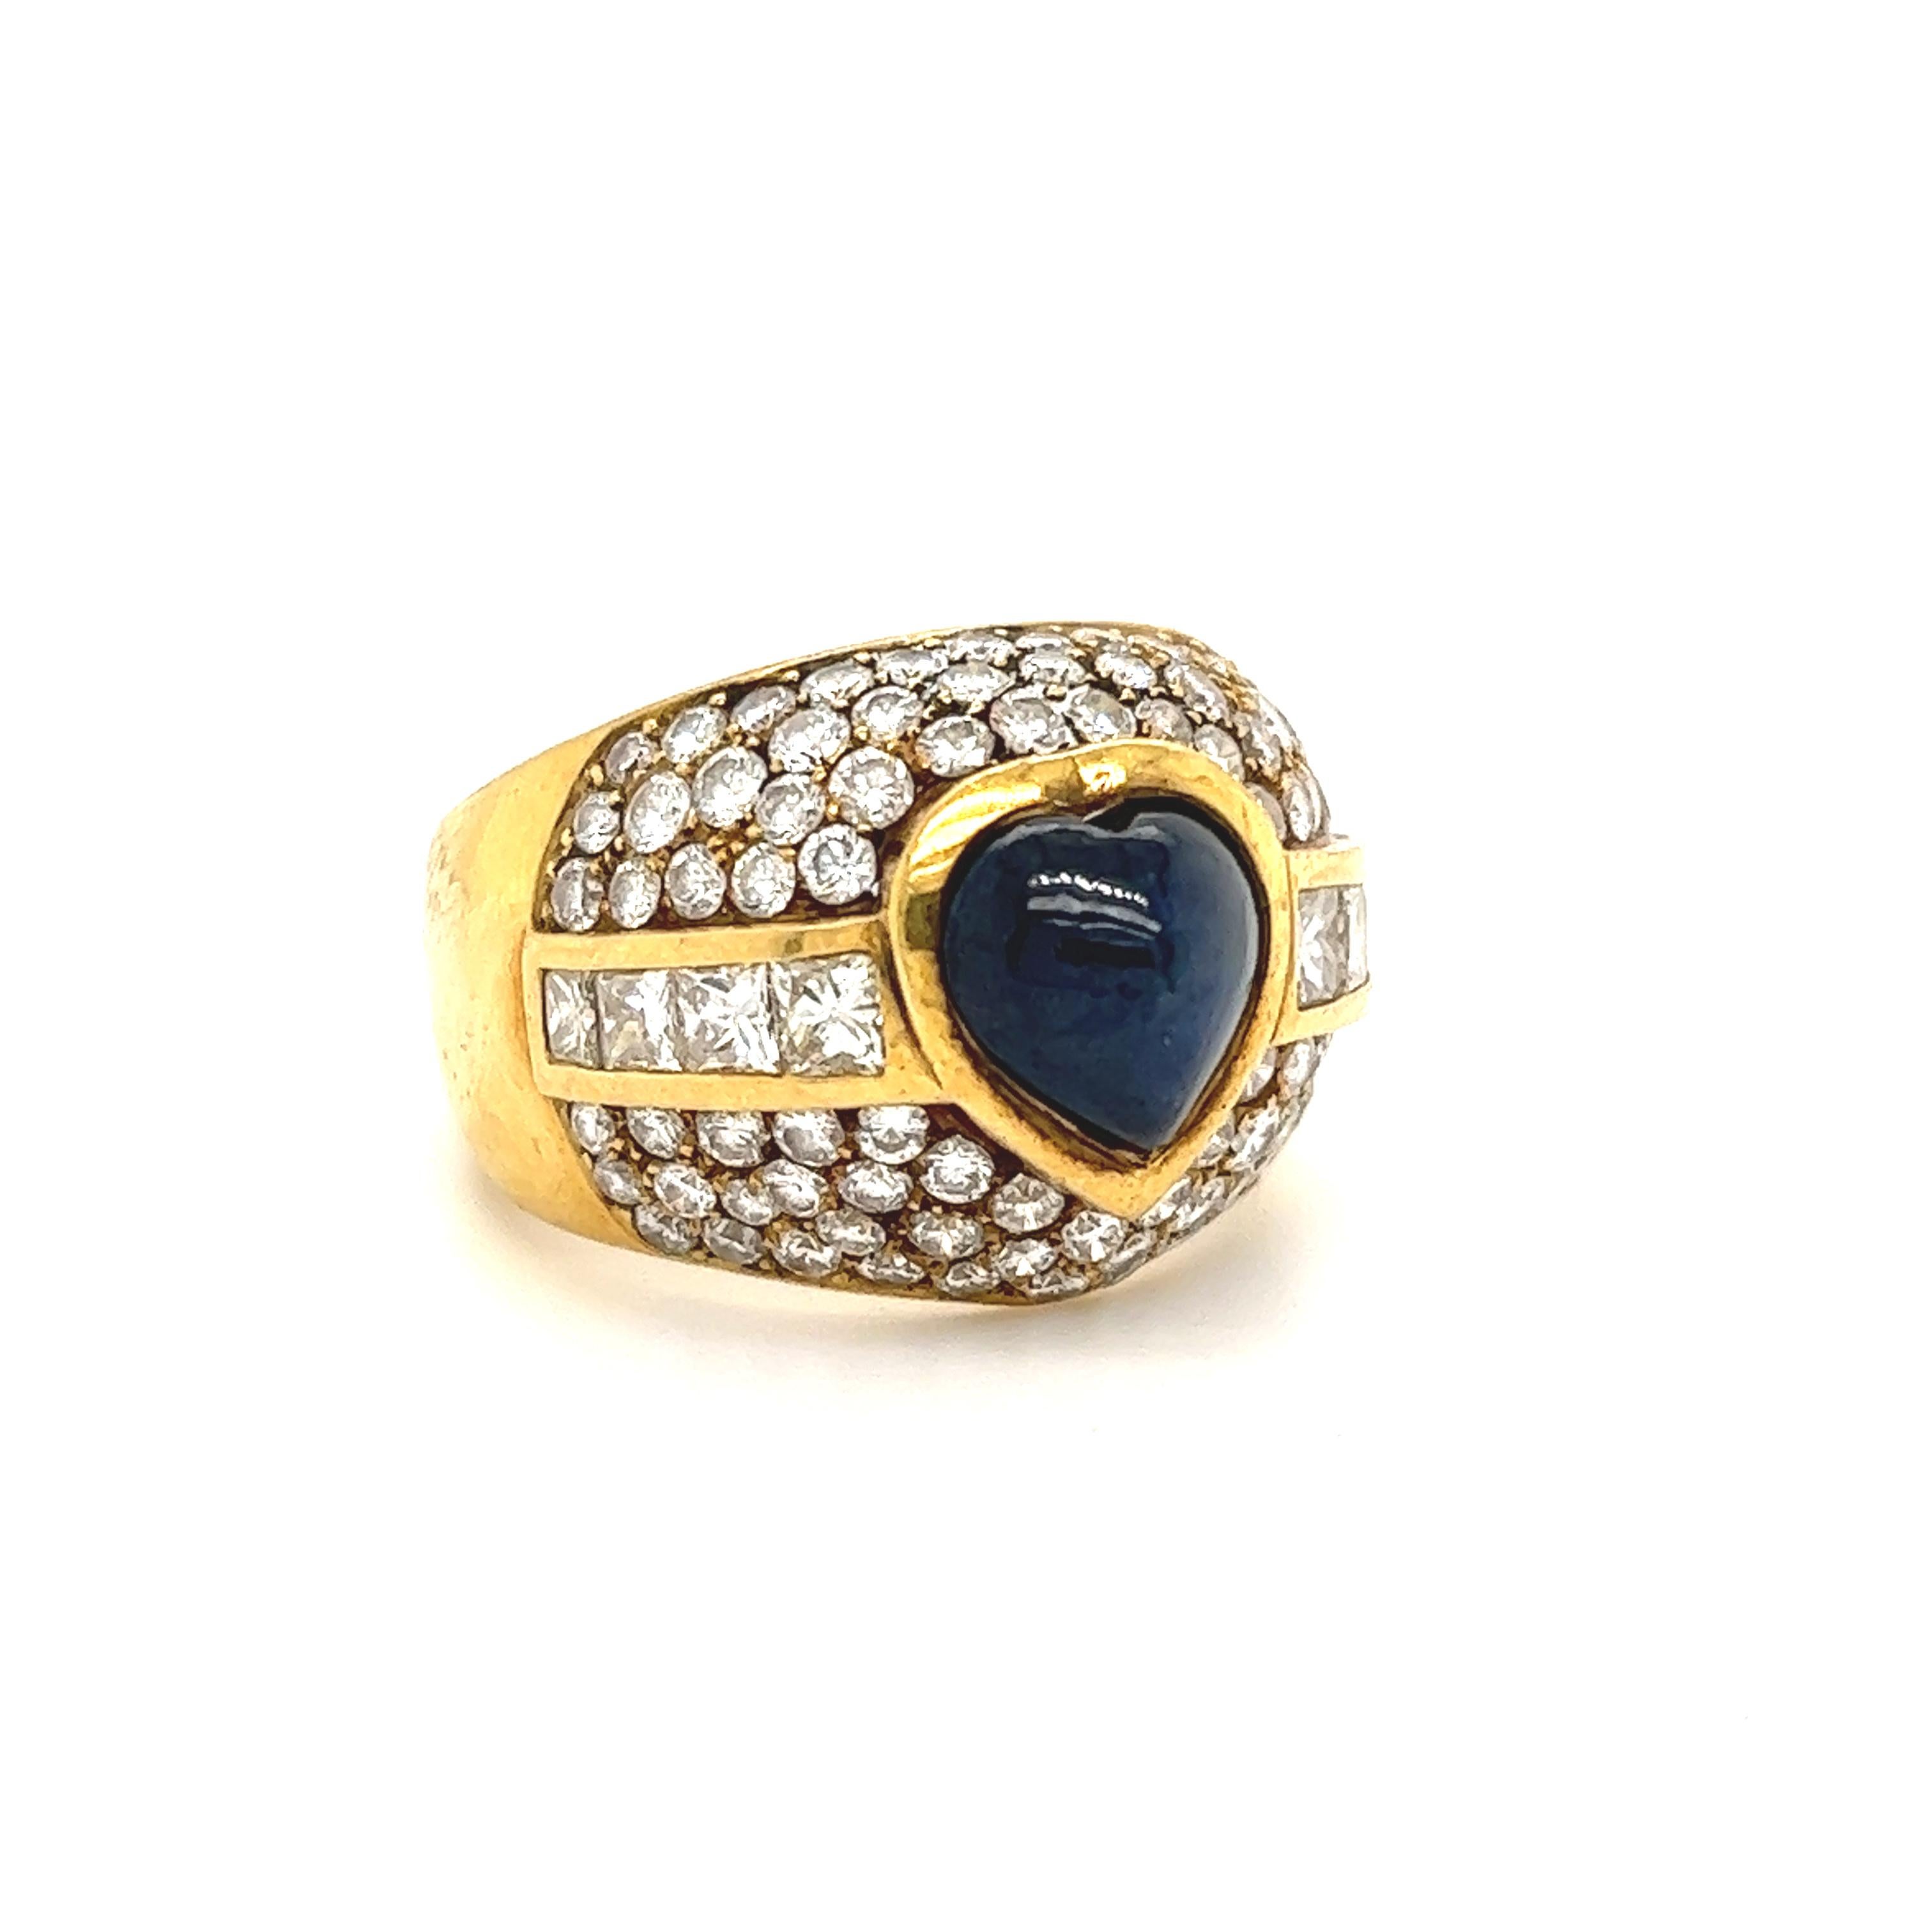 Exceptional design seen on this 18k yellow gold ring. The highlight of the ring is one heart shaped blue sapphire that is bezel set in the center of the ring. The sapphire shows a rich blue color that stands out against the yellow gold and diamond